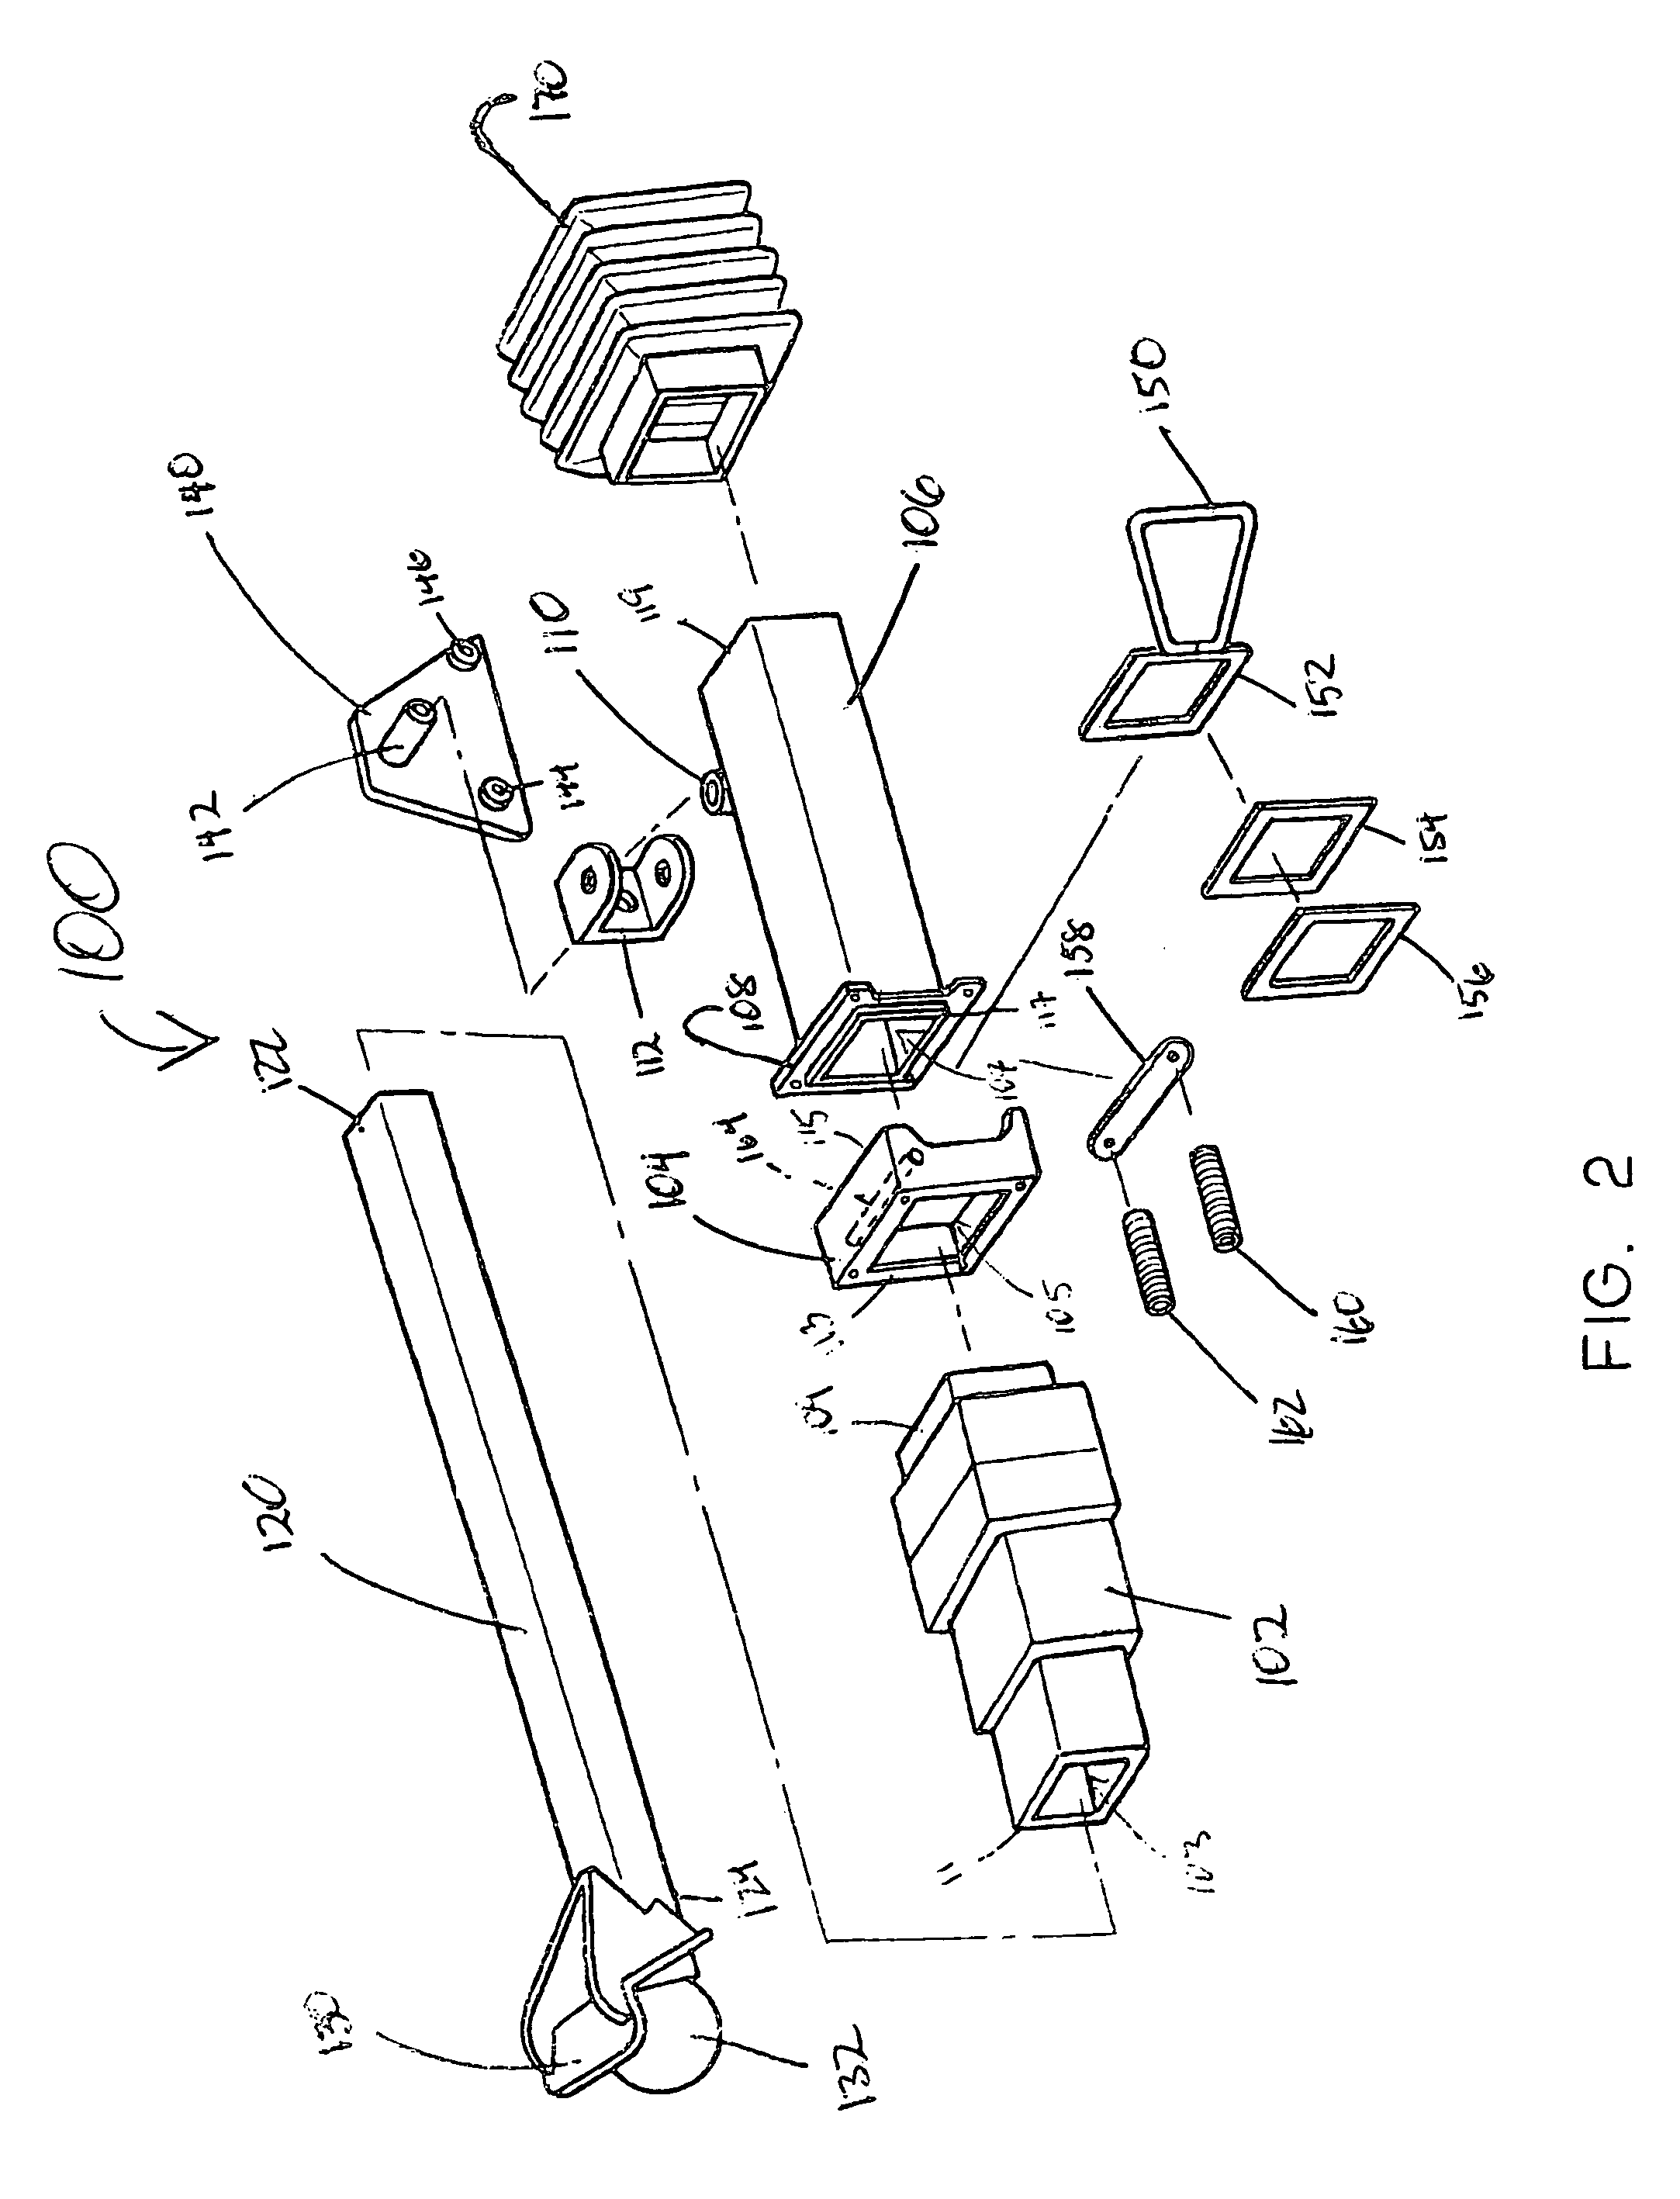 Method and apparatus for the lineal, straight, reverse movement of one or more vehicles in tow behind a prime mover